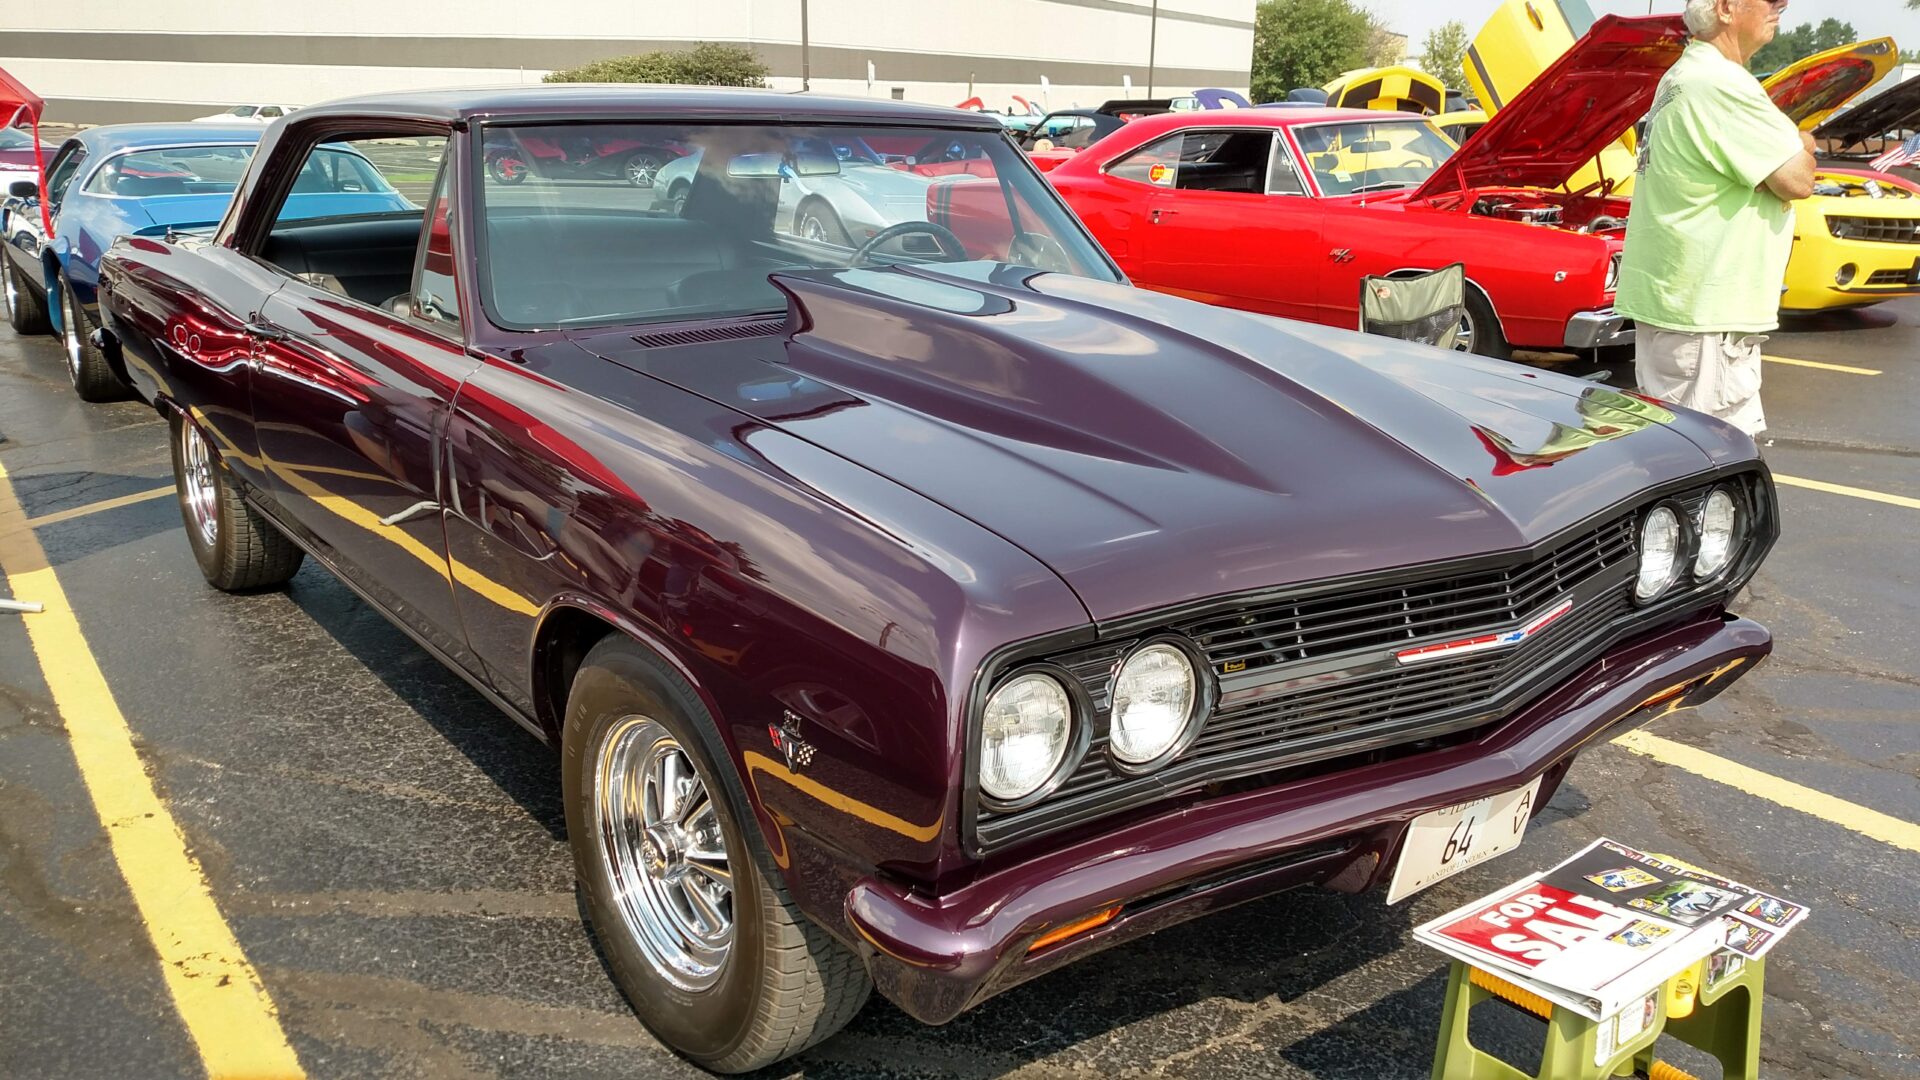 A Wine Color Chevelle Car on Parking